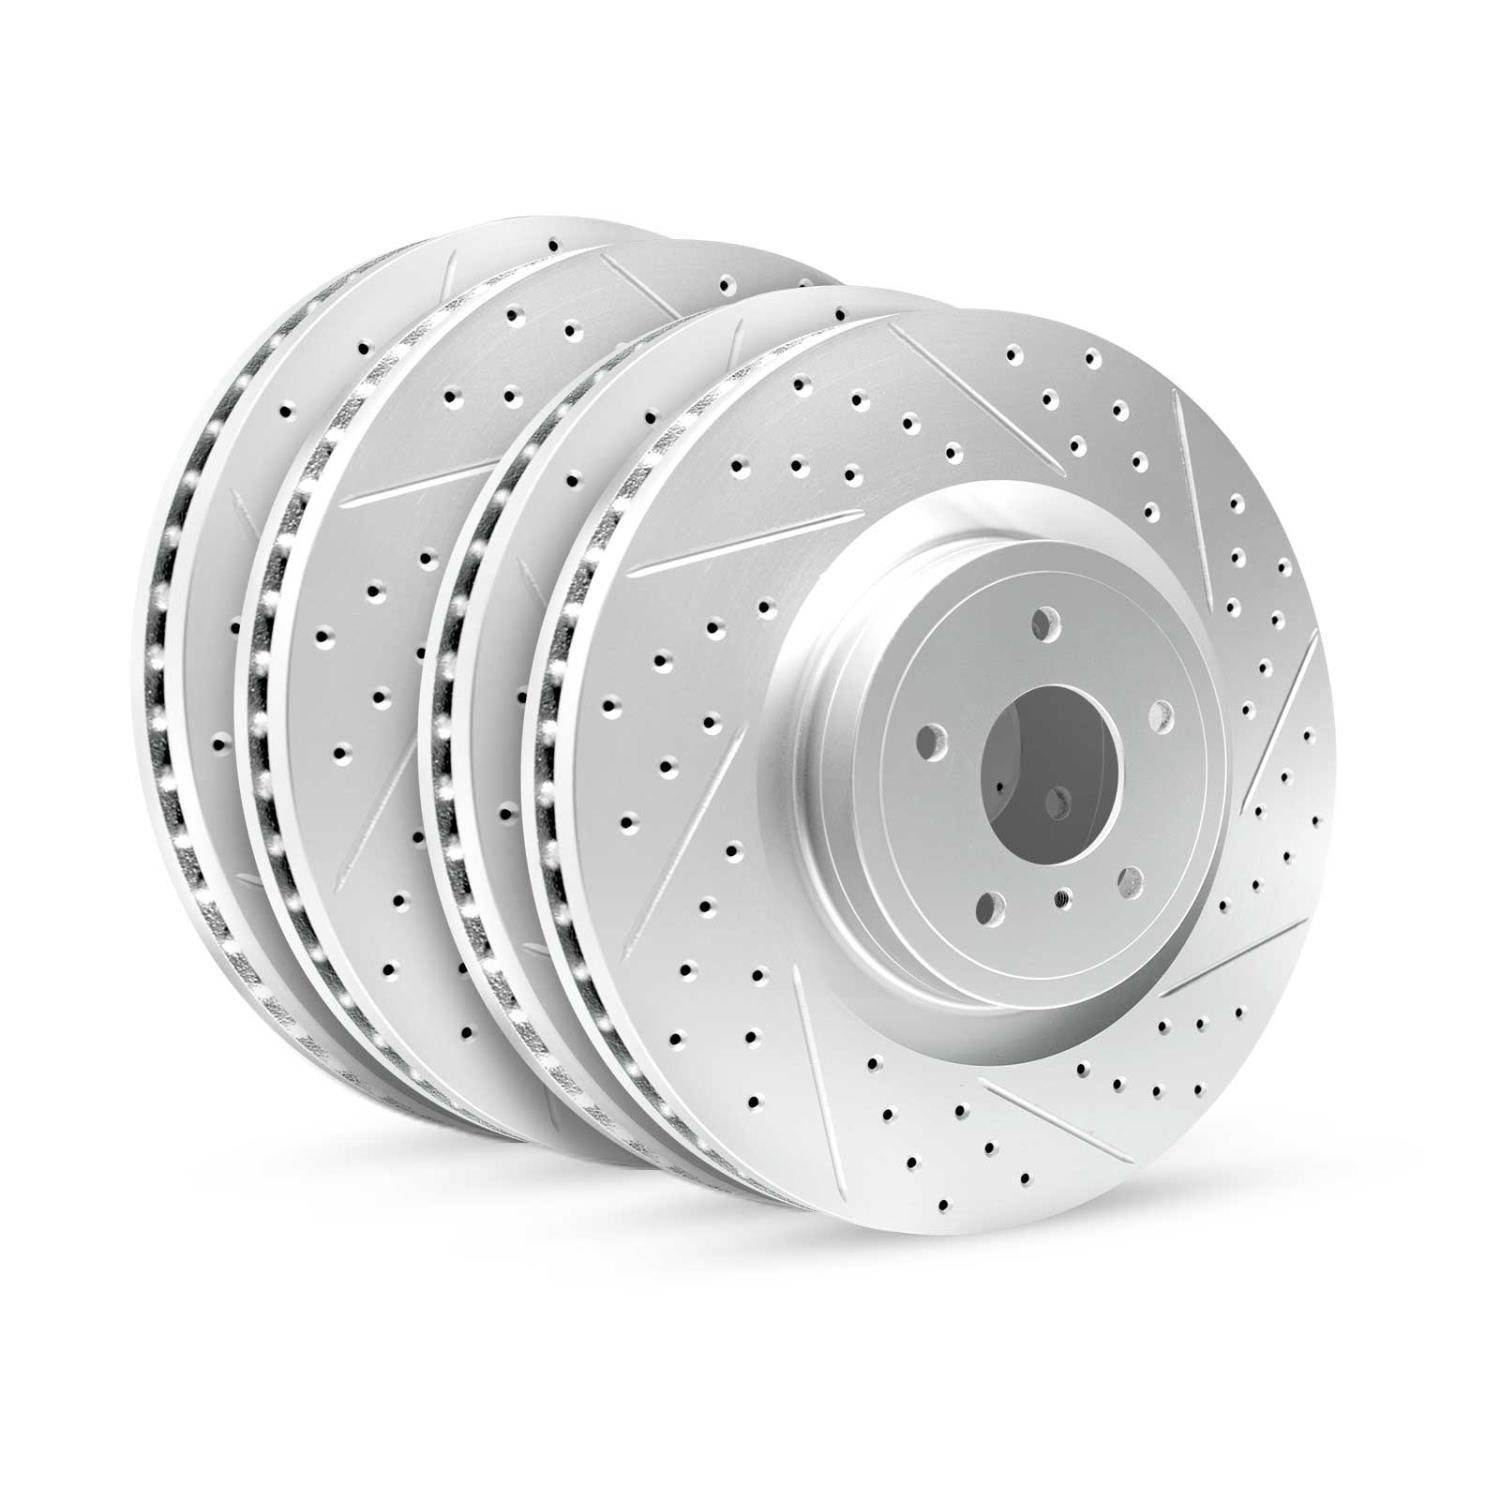 GEO-Carbon Drilled/Slotted Rotors, 1999-2002 Ford/Mazda,